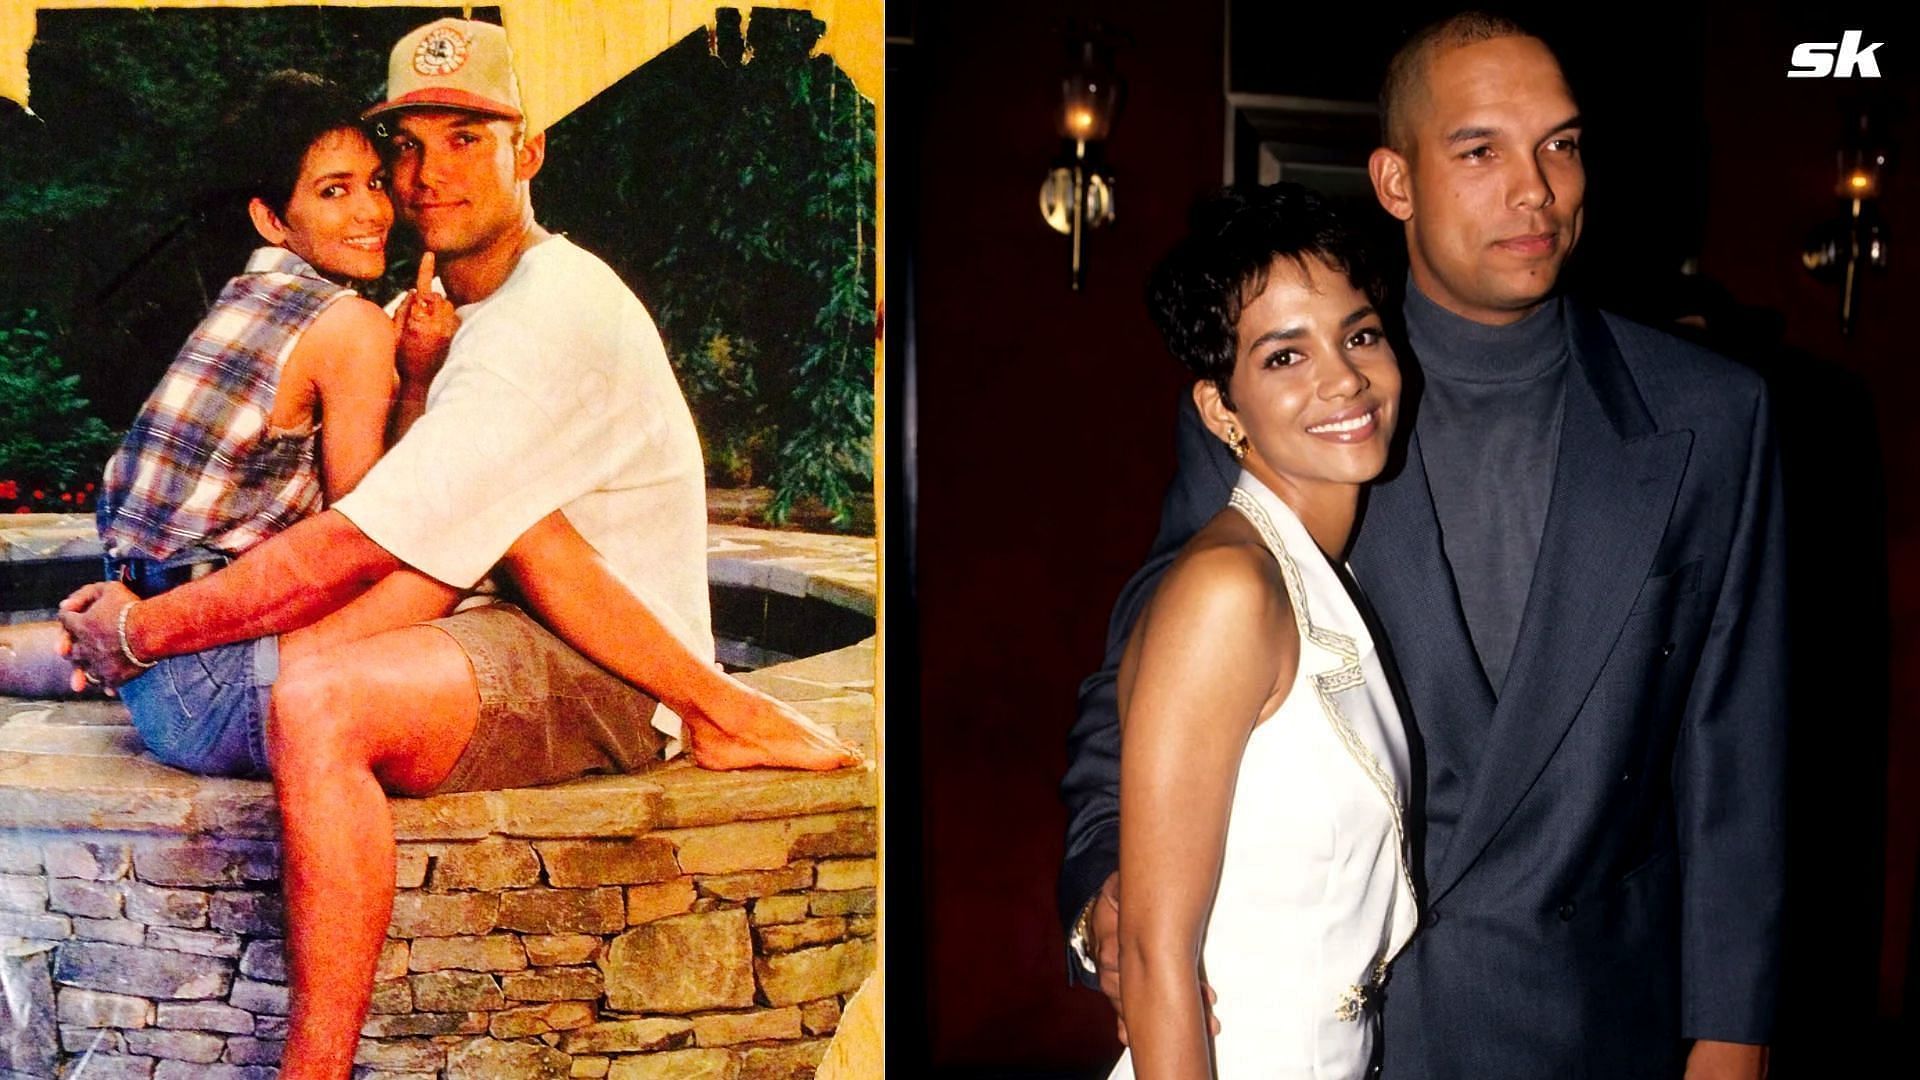 Former MLB outfielder and designated hitter, David Justice with his ex-wife Halle Berry.